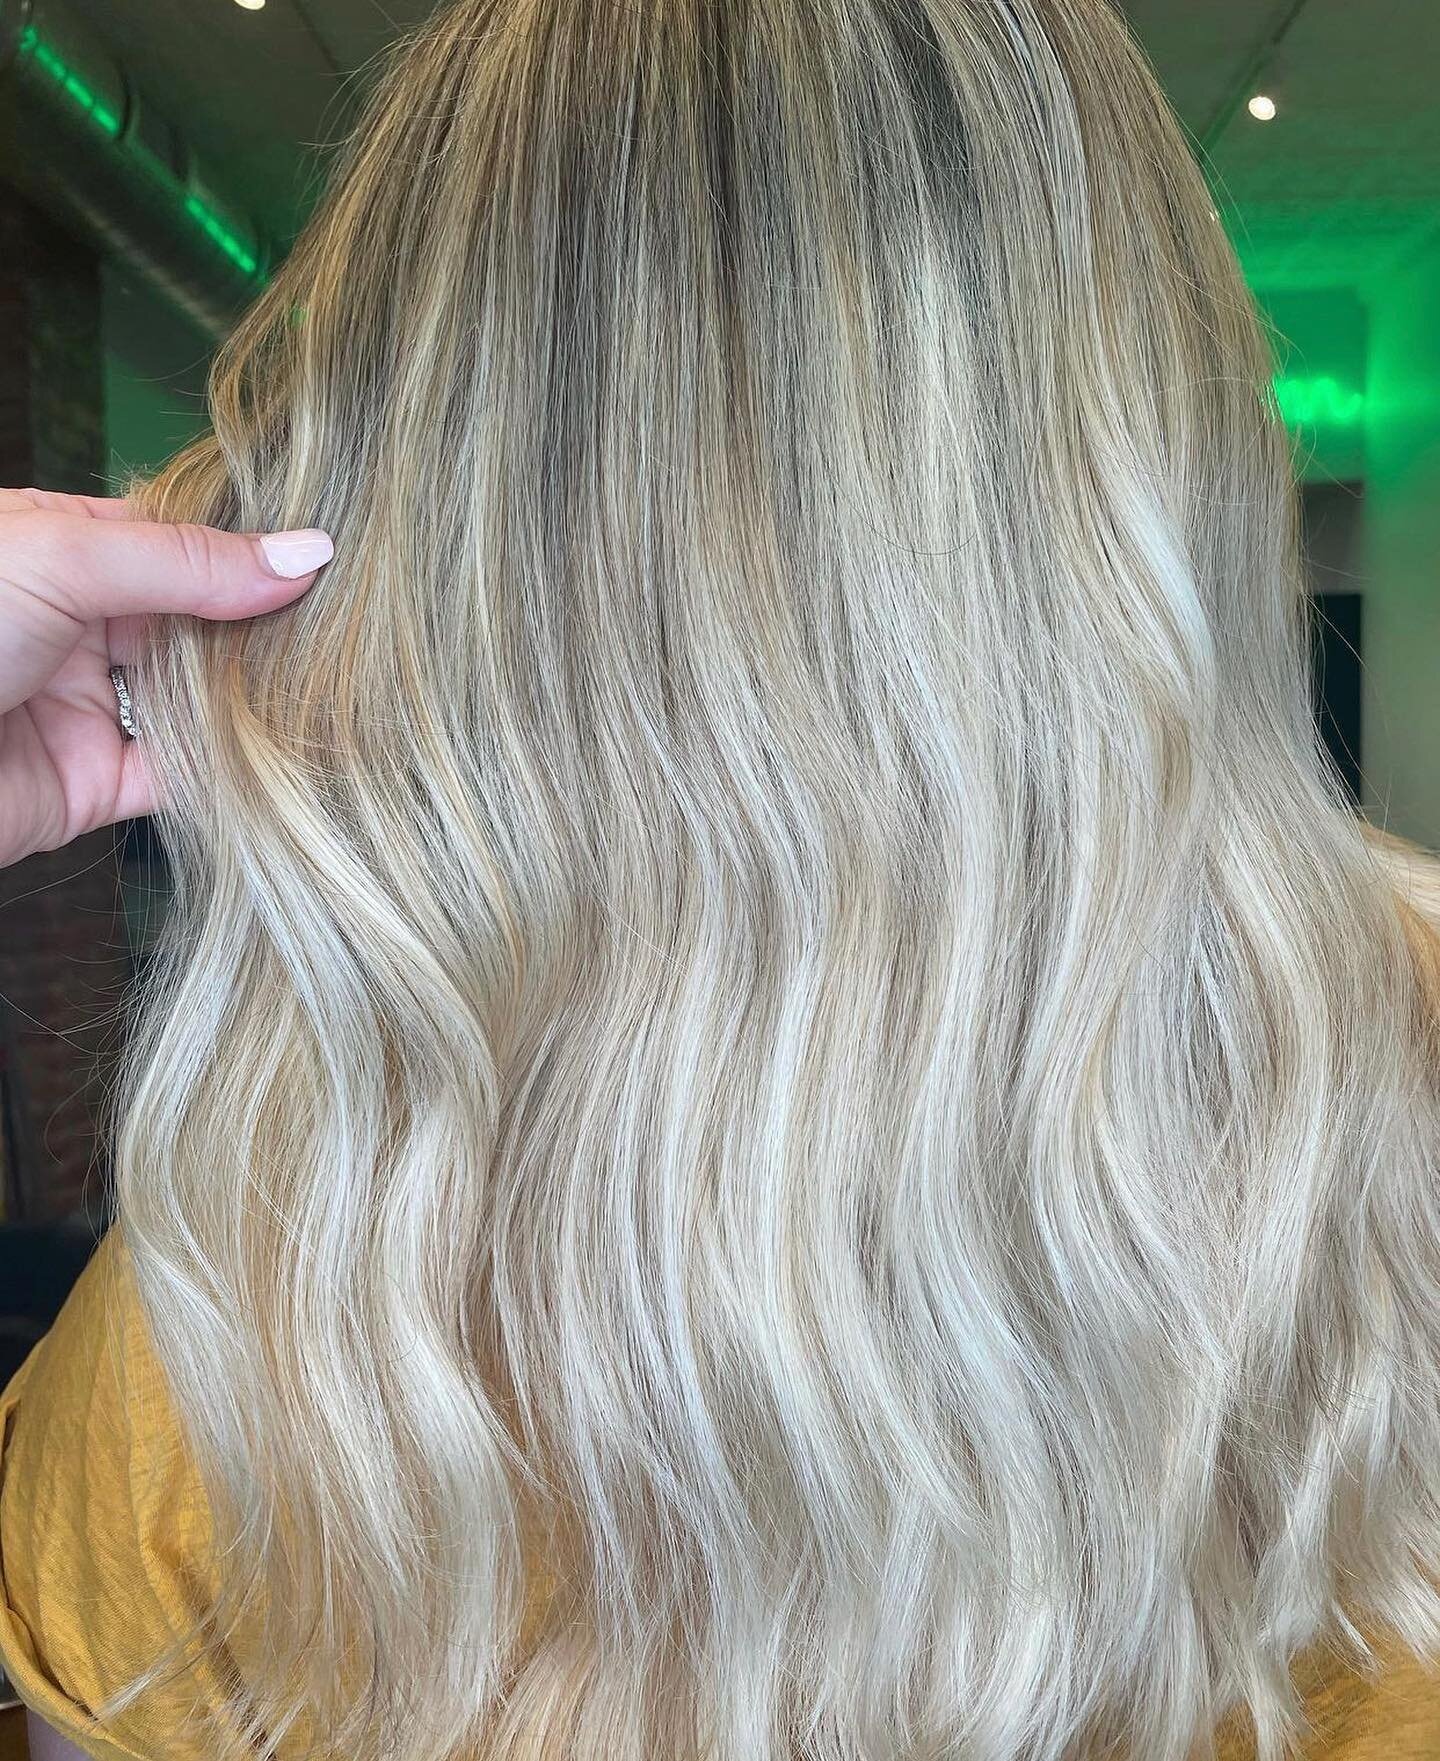 Let&rsquo;s kill it in blonding🤩
Freshen up your coloring skills with our 6 week course 🎨
Master all the latest trends and gain confidence in your cutting &amp; coloring 🤘🏼
Want to join Gang Gang EDU? Hit the contact button on our bio💖